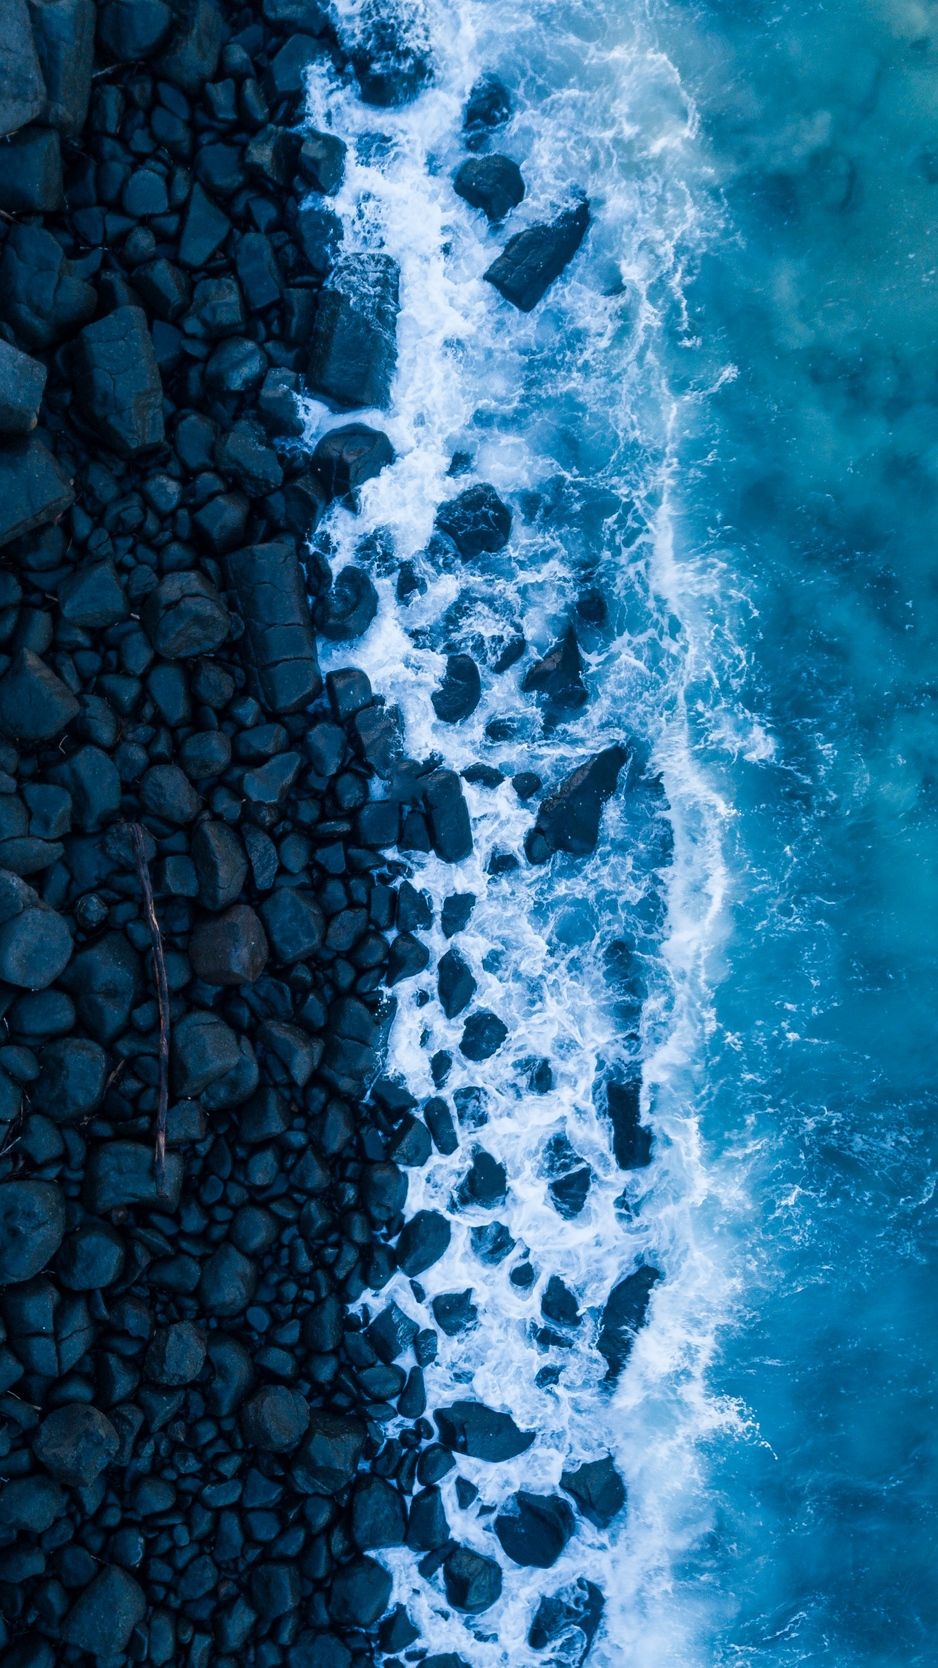 Ocean, surf, rocks, view from above, shore wallpaper